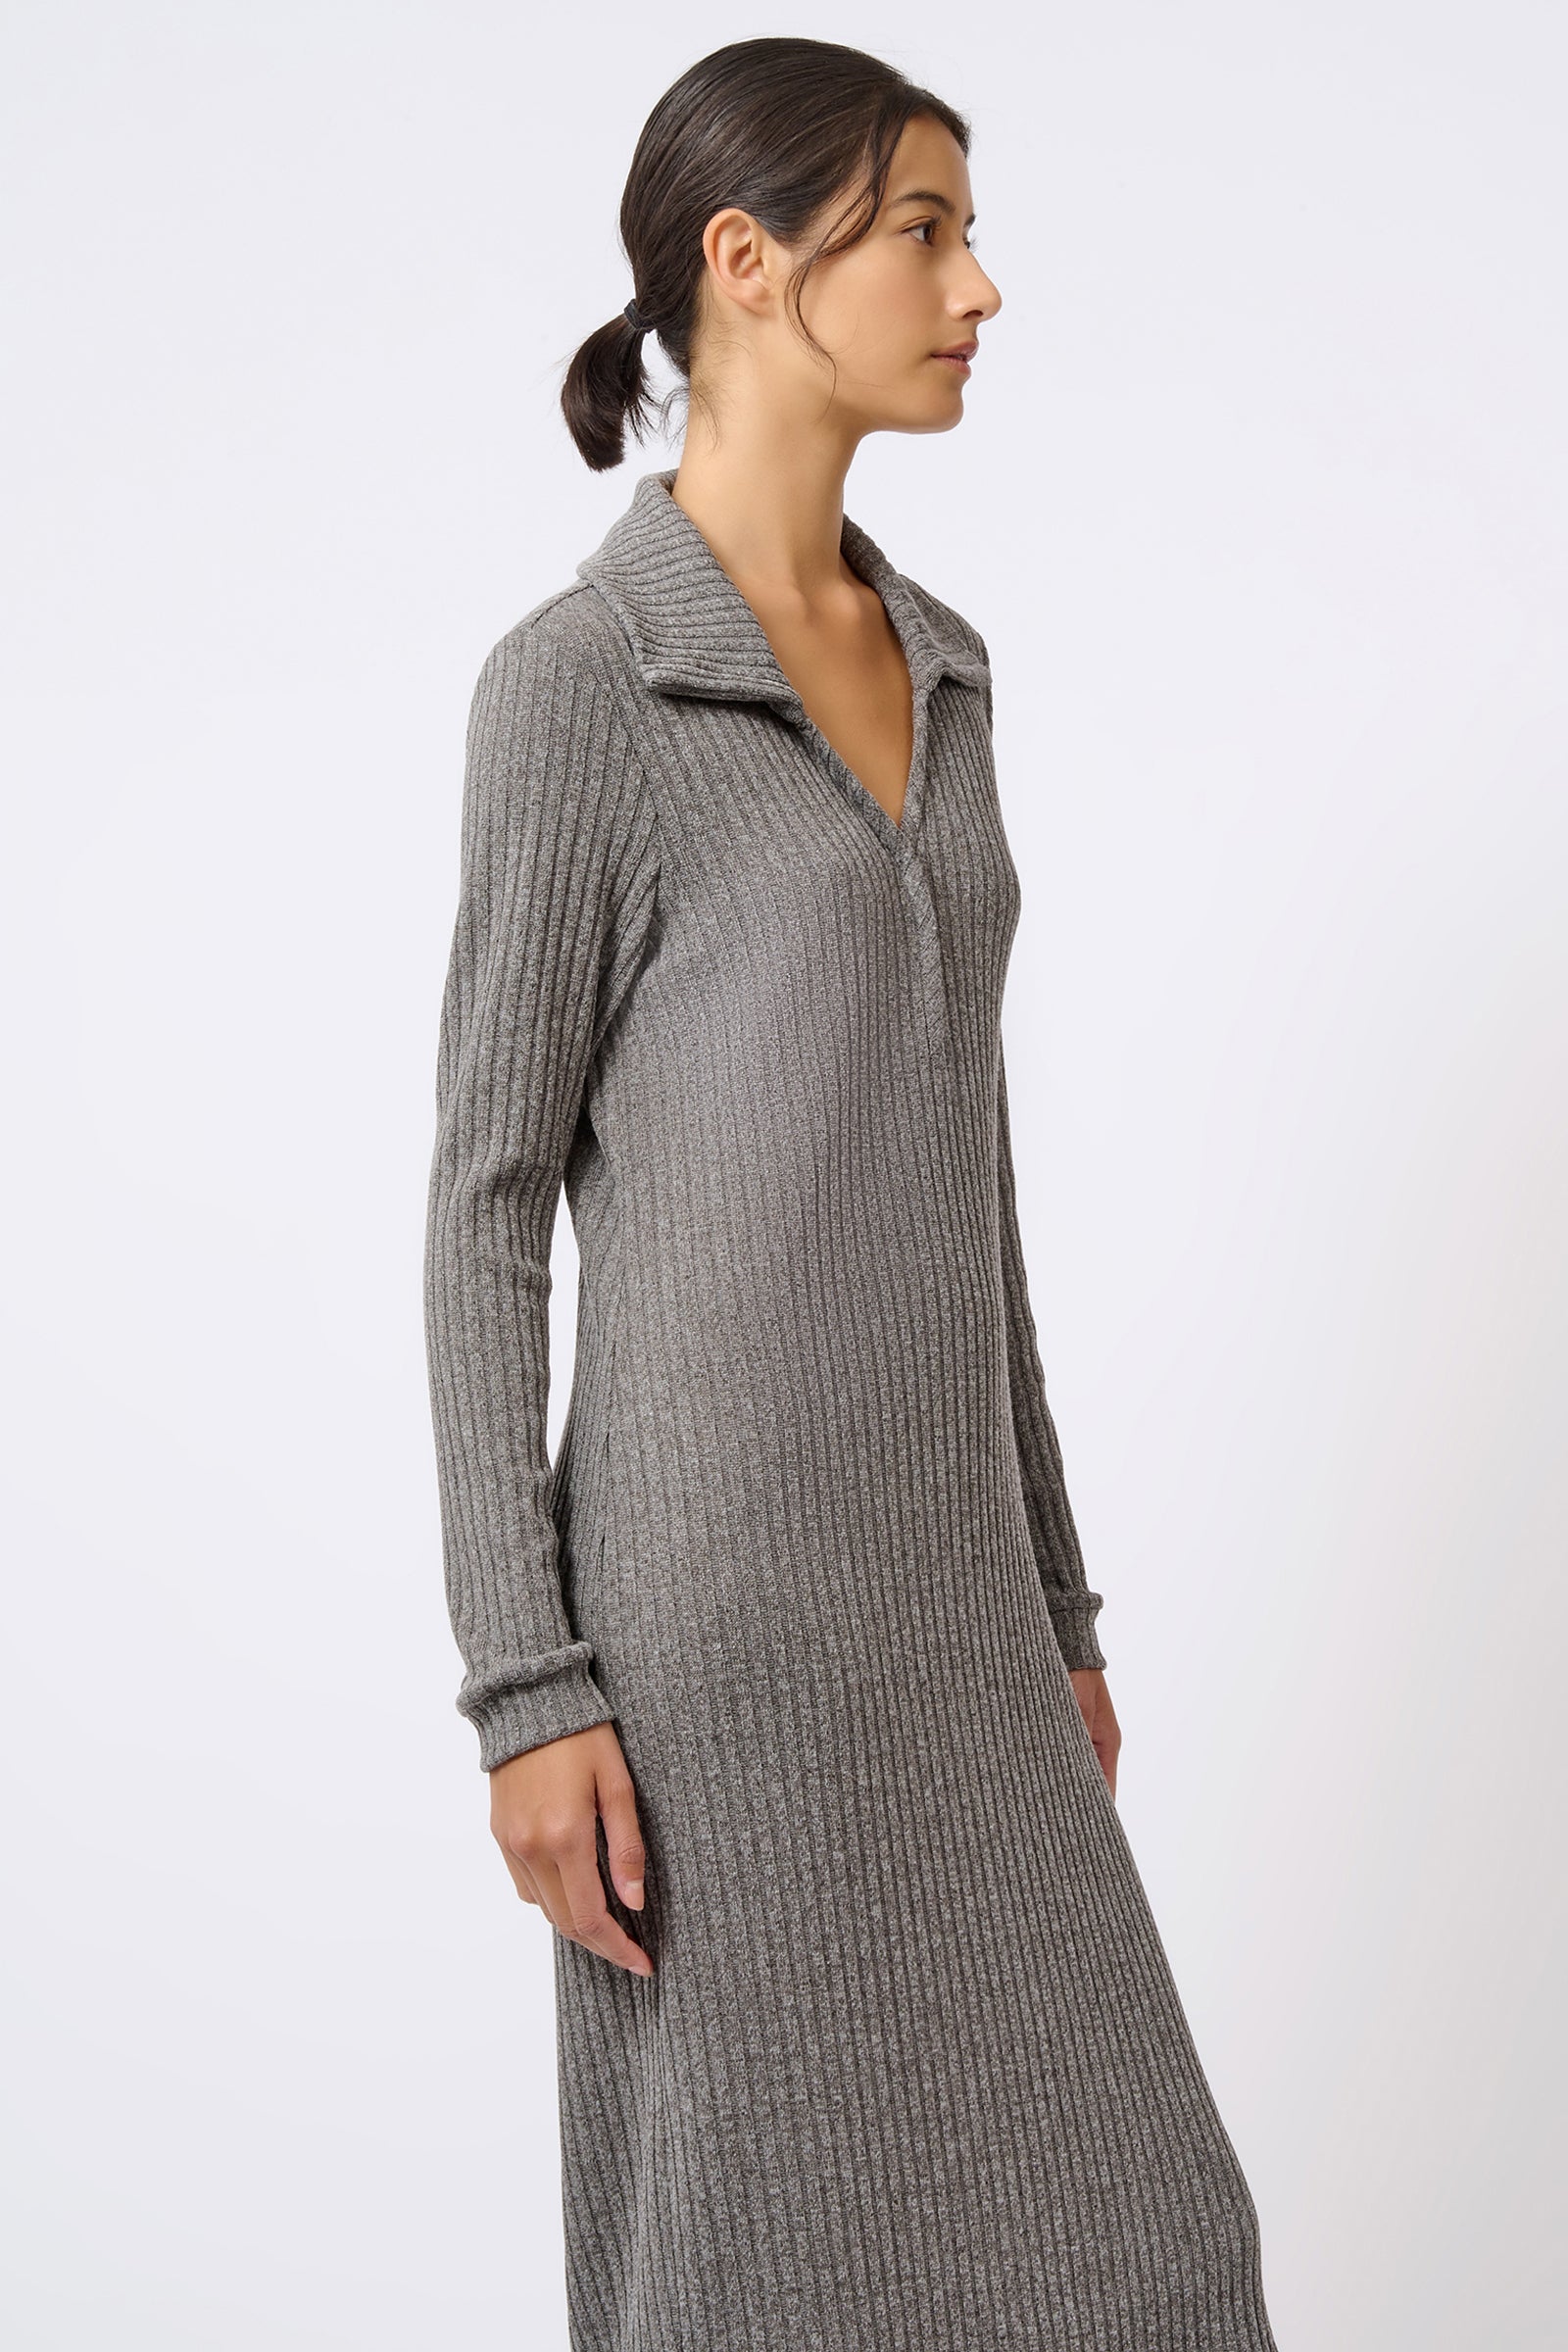 Kal Rieman Audrey Collared Rib Dress in Charcoal on Model Side View